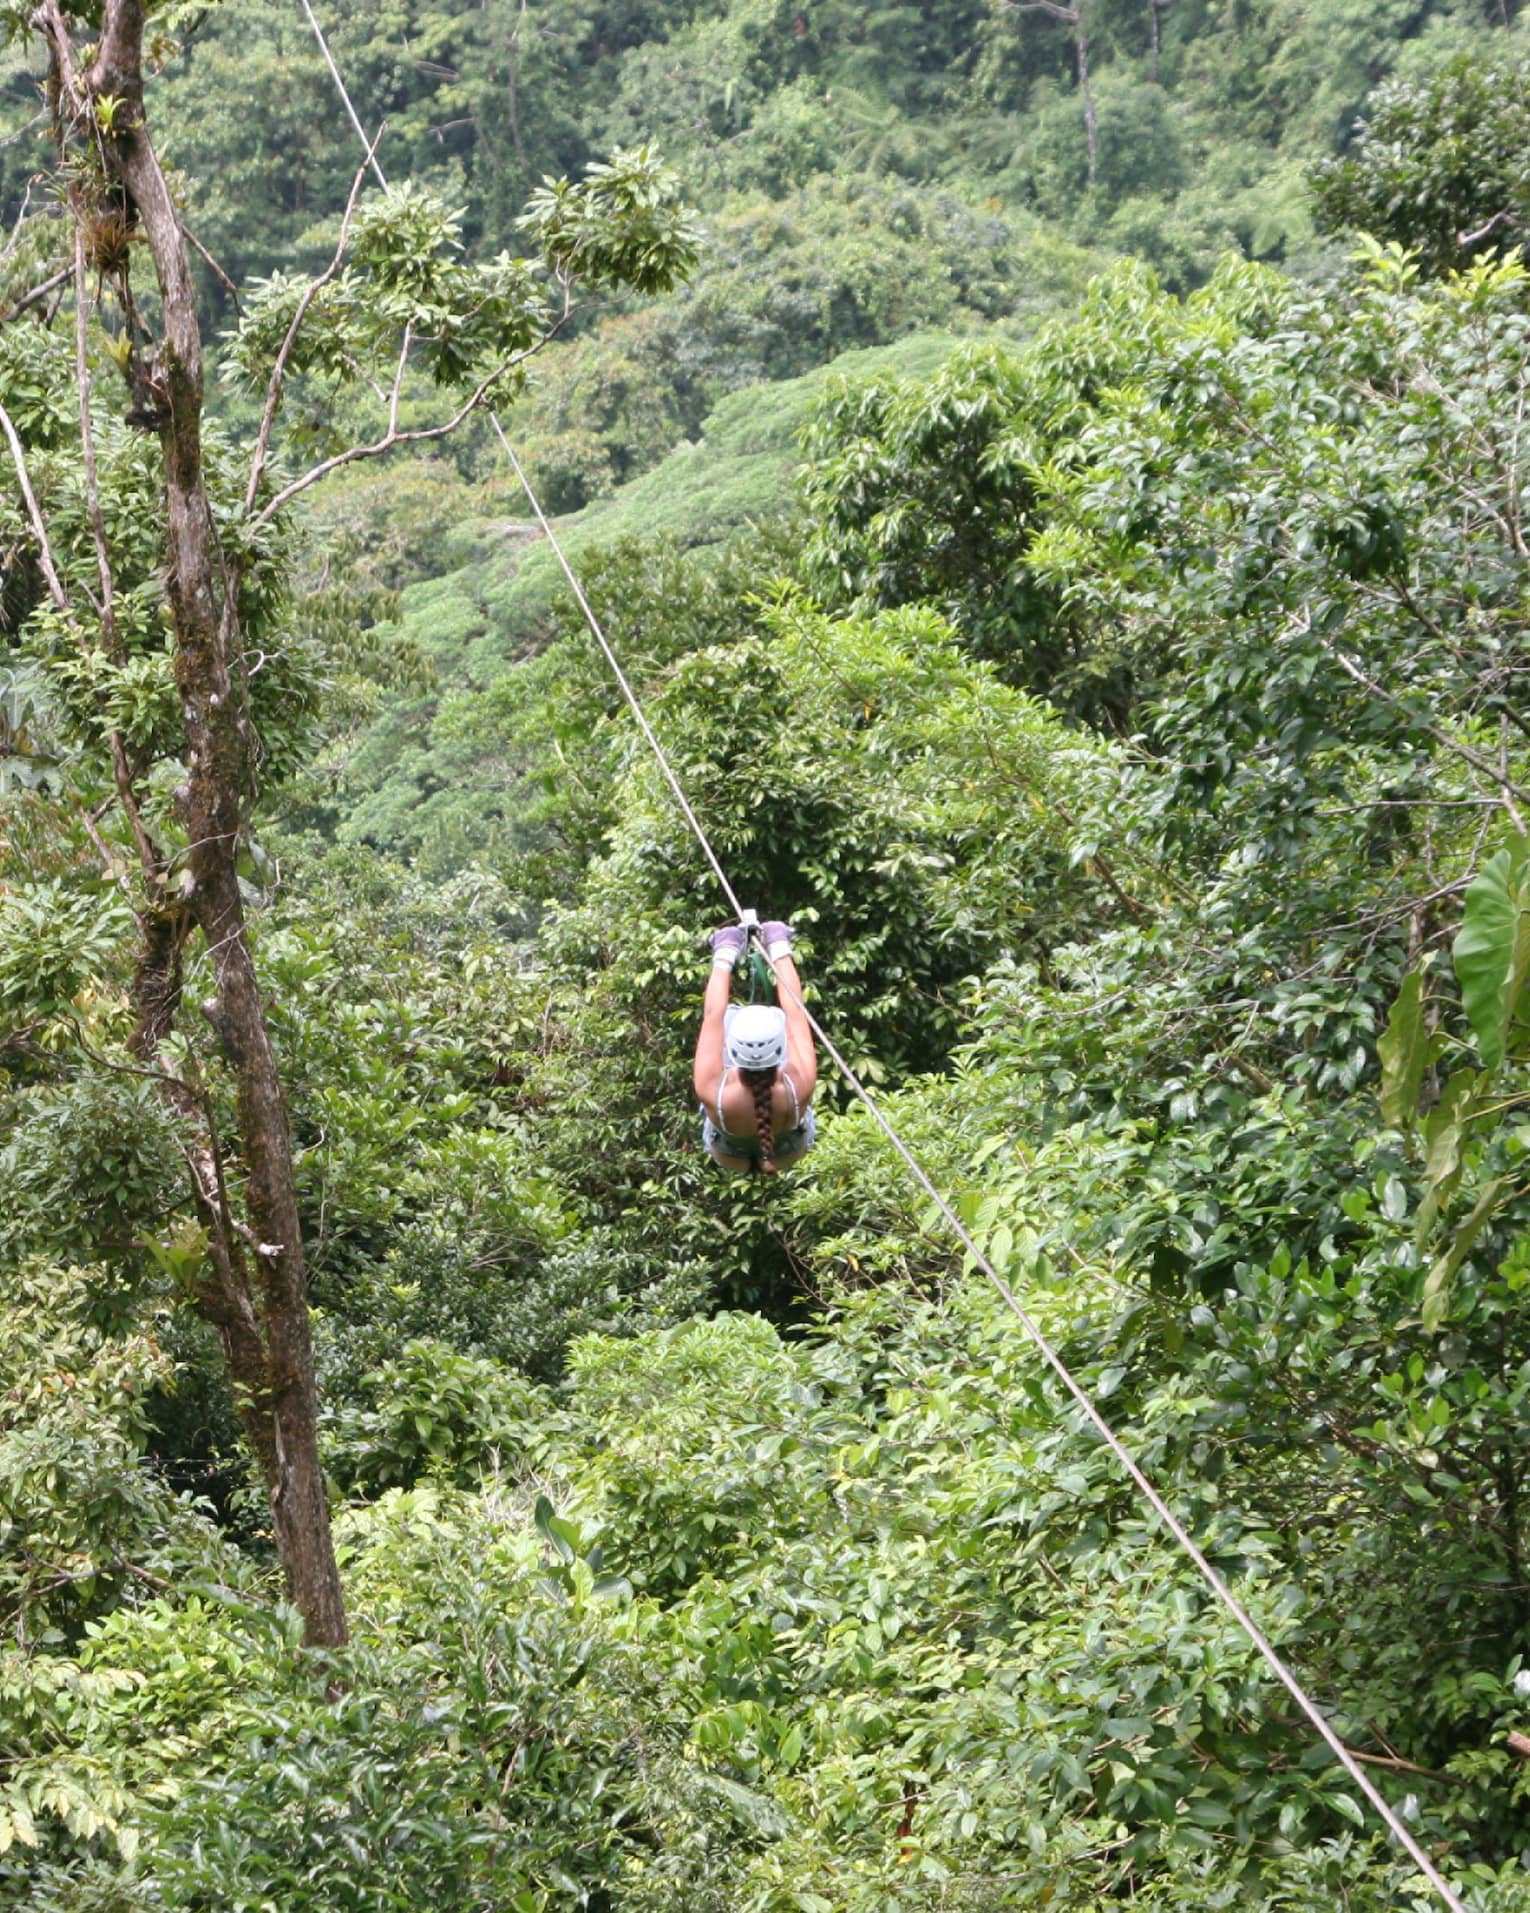 Aerial view of a person zip-lining through dense forest. Gripping the handlebars, the adventurer soars above towering trees.